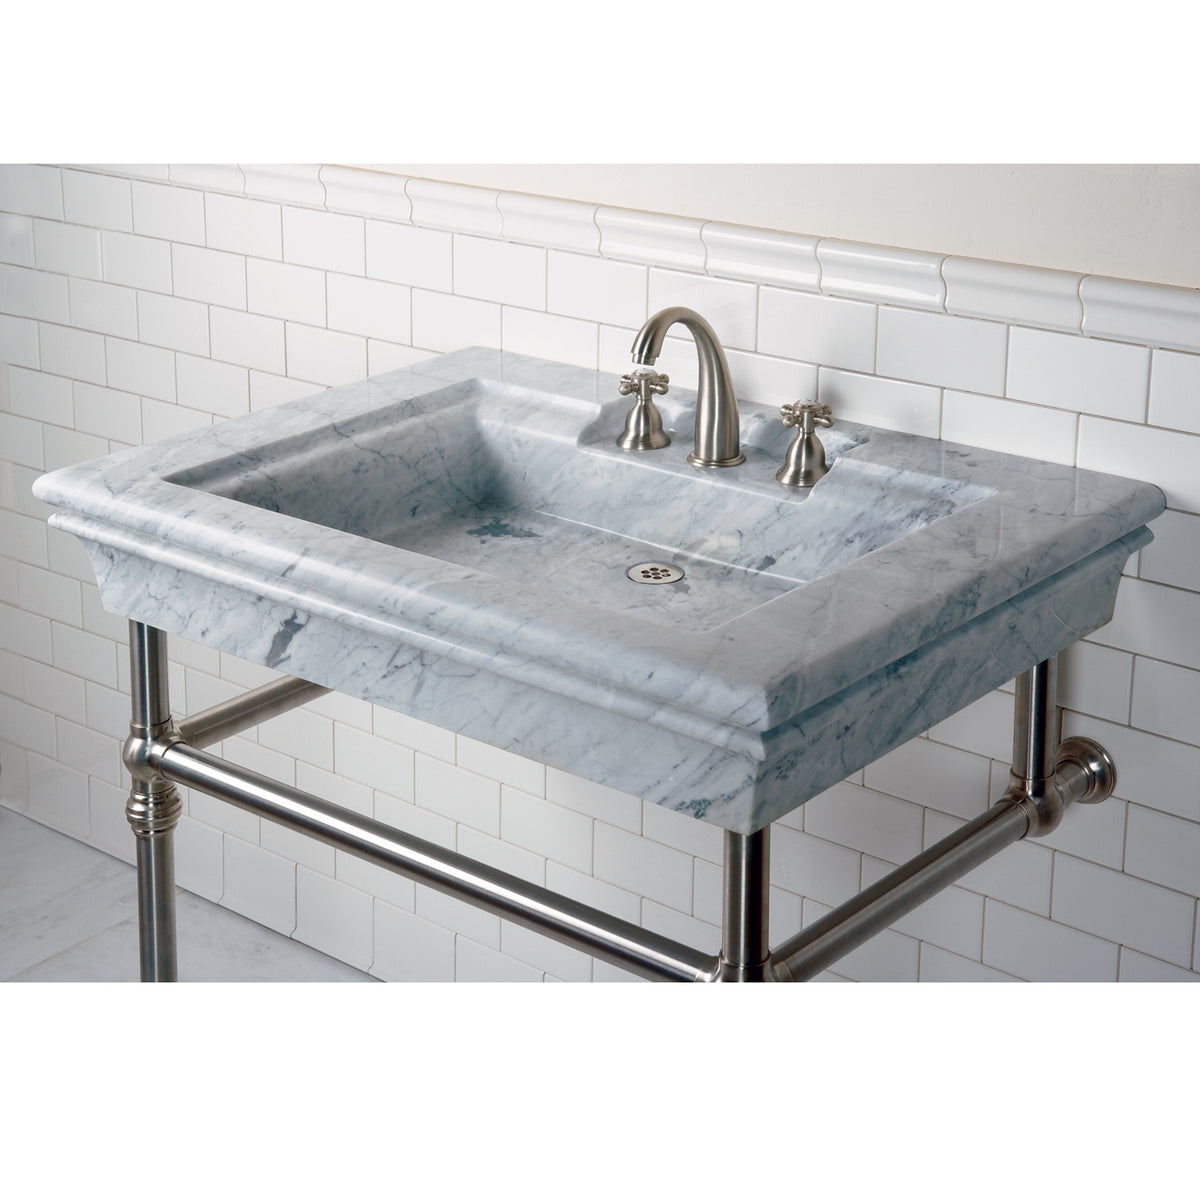 Bordeaux Vanity sink is carved from a solid block of carrara marble with a polished finish.  image 4 of 4